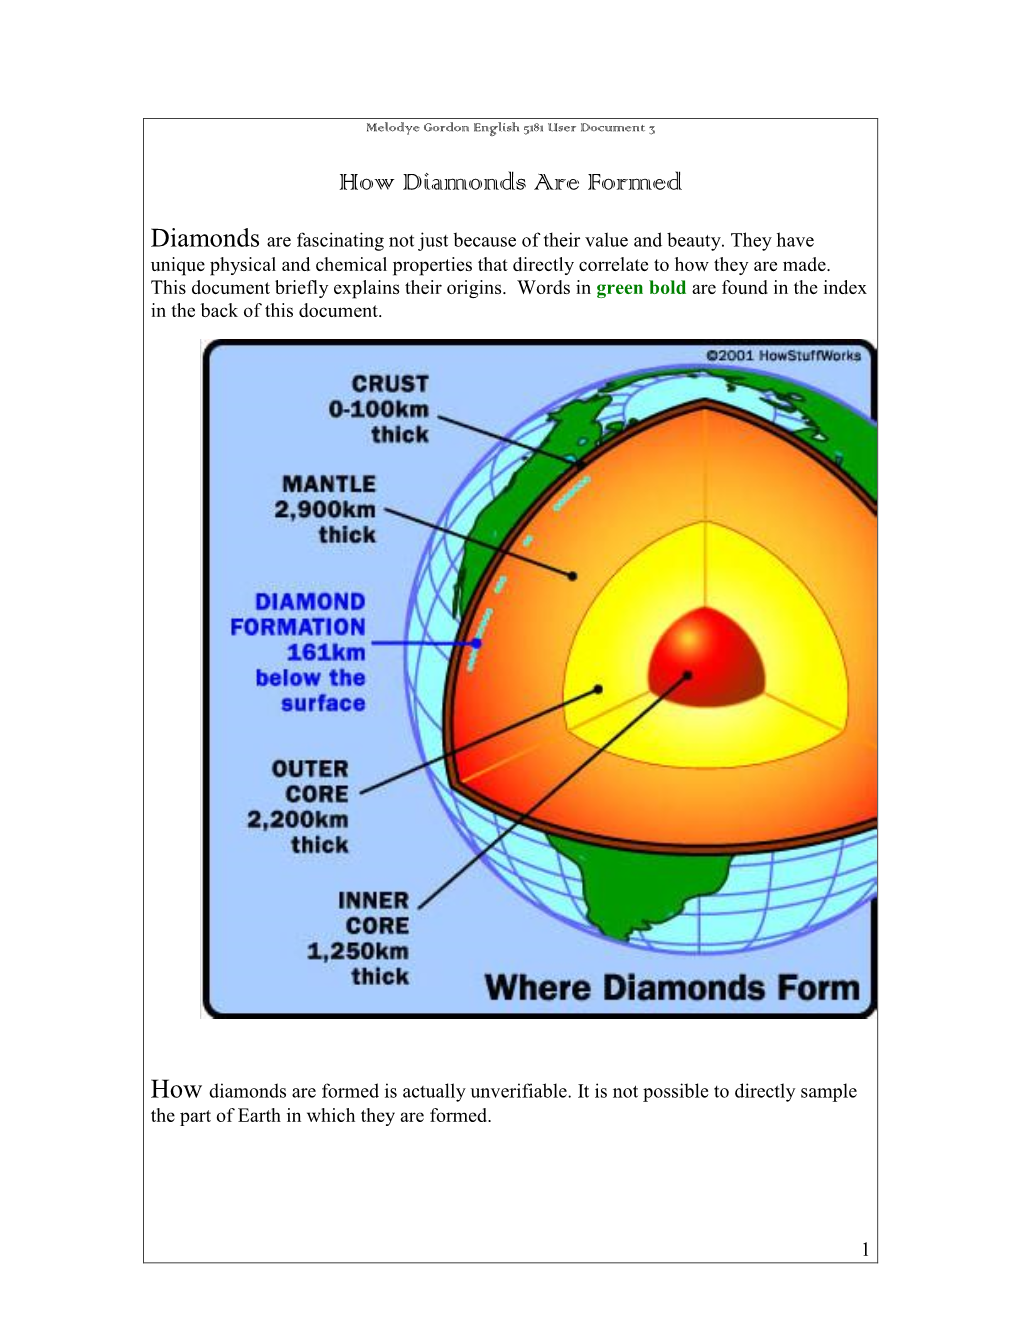 How Diamonds Are Formed